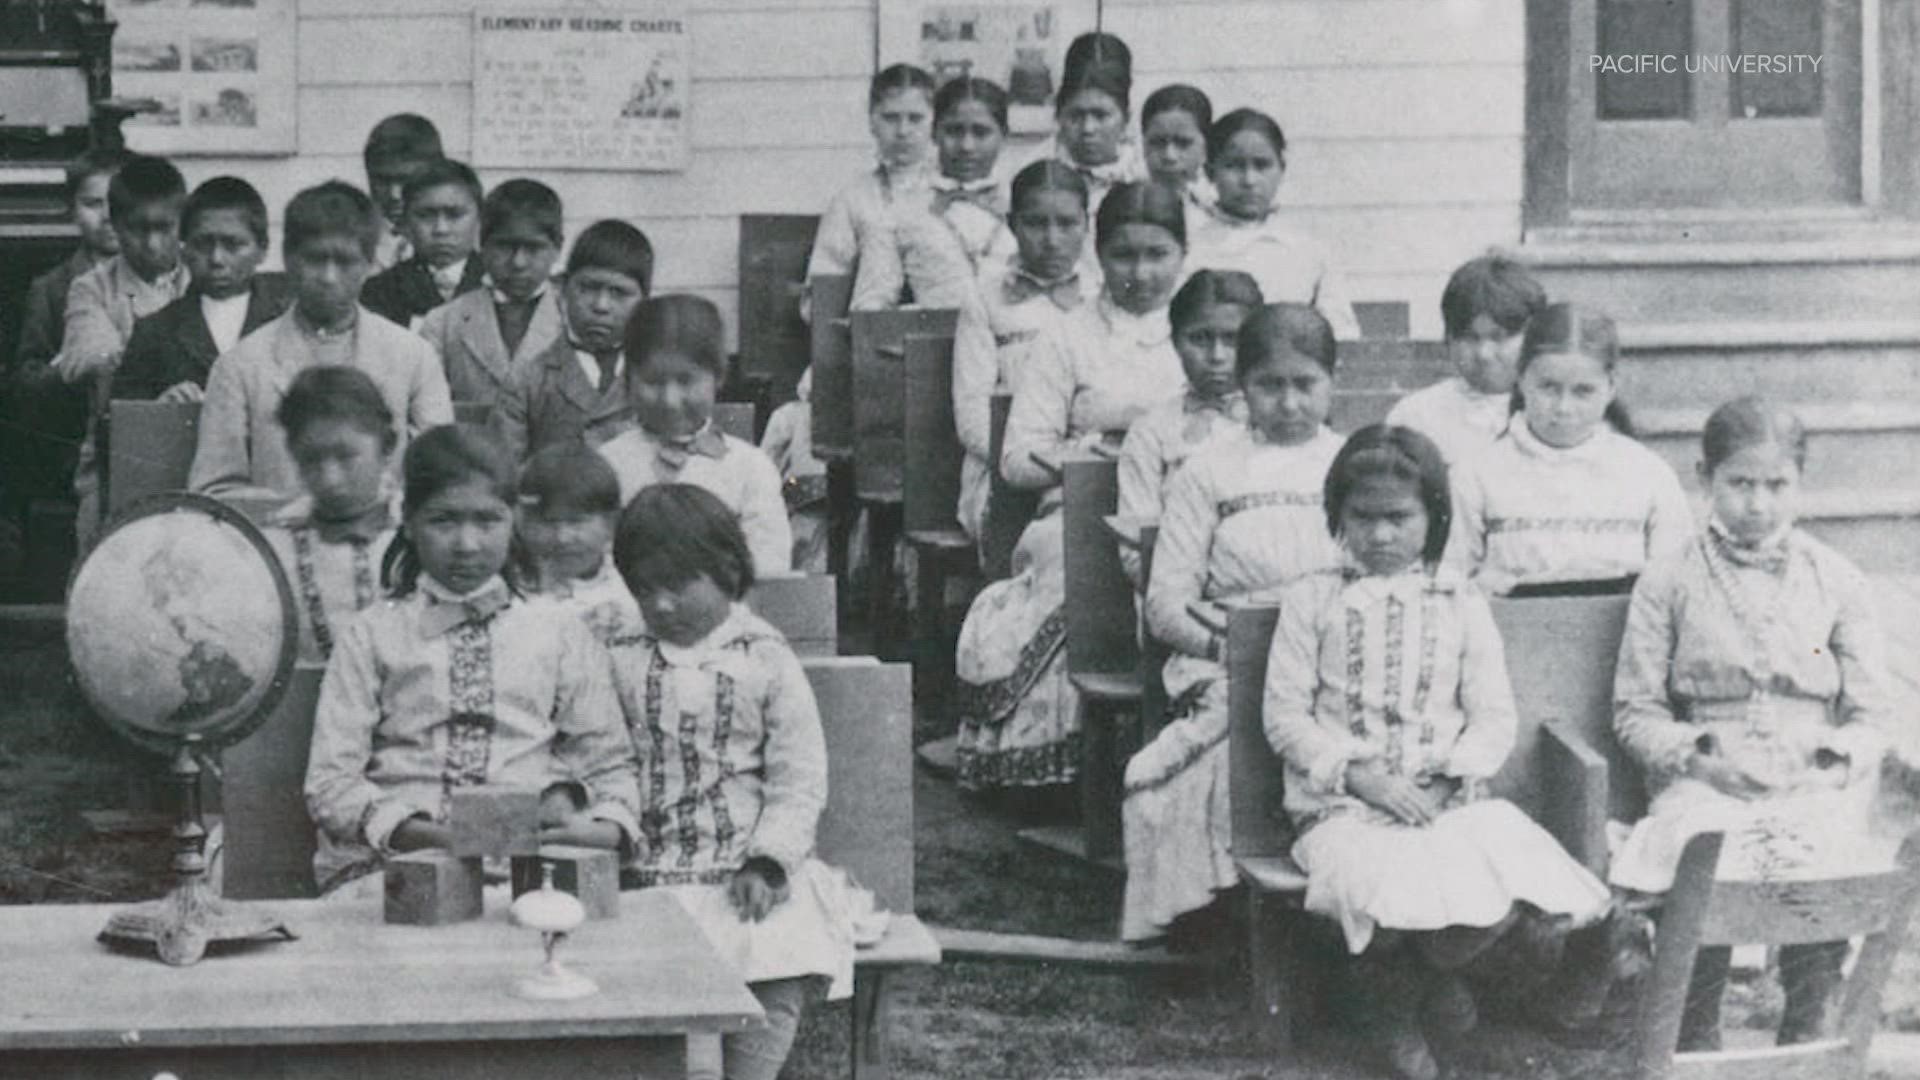 Nearly 83% of all school-aged Indigenous children were taken from their homes to boarding schools, including some in the Pacific Northwest.